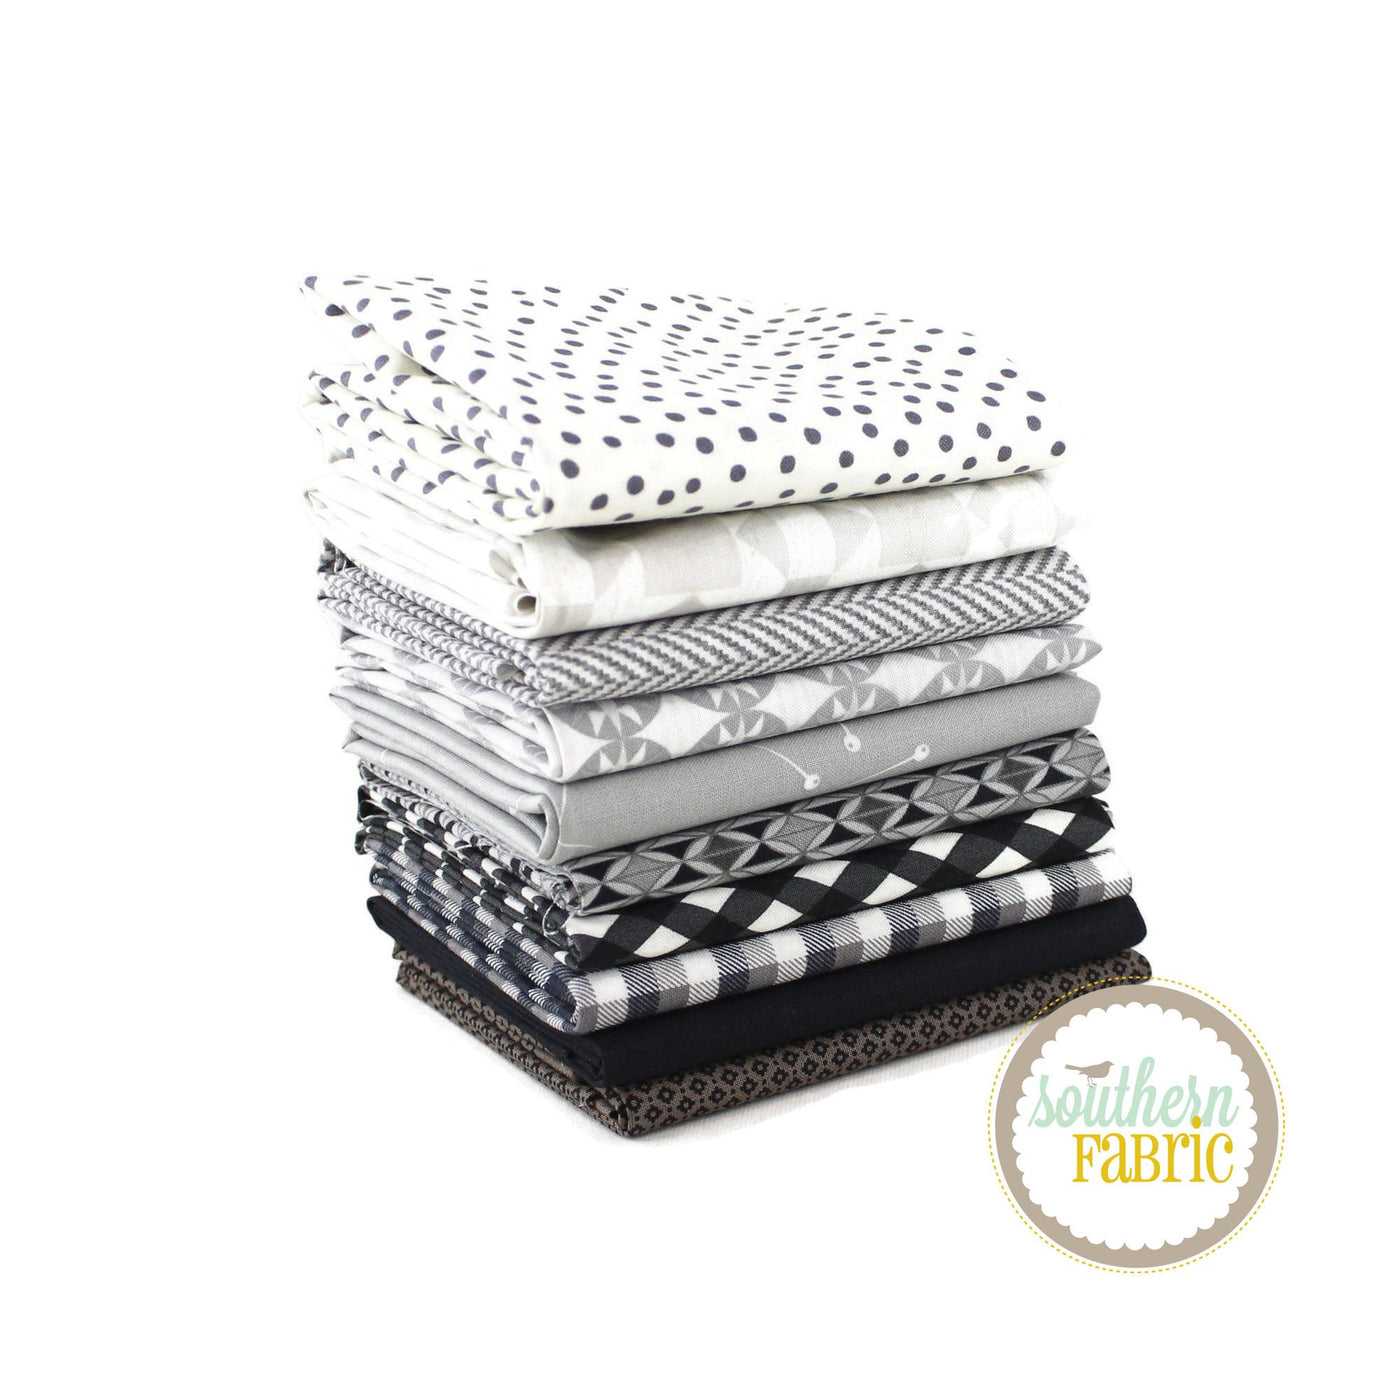 Black, White, and Grey - Half Yard Bundle (10 pcs) by Mixed Designers for Southern Fabric